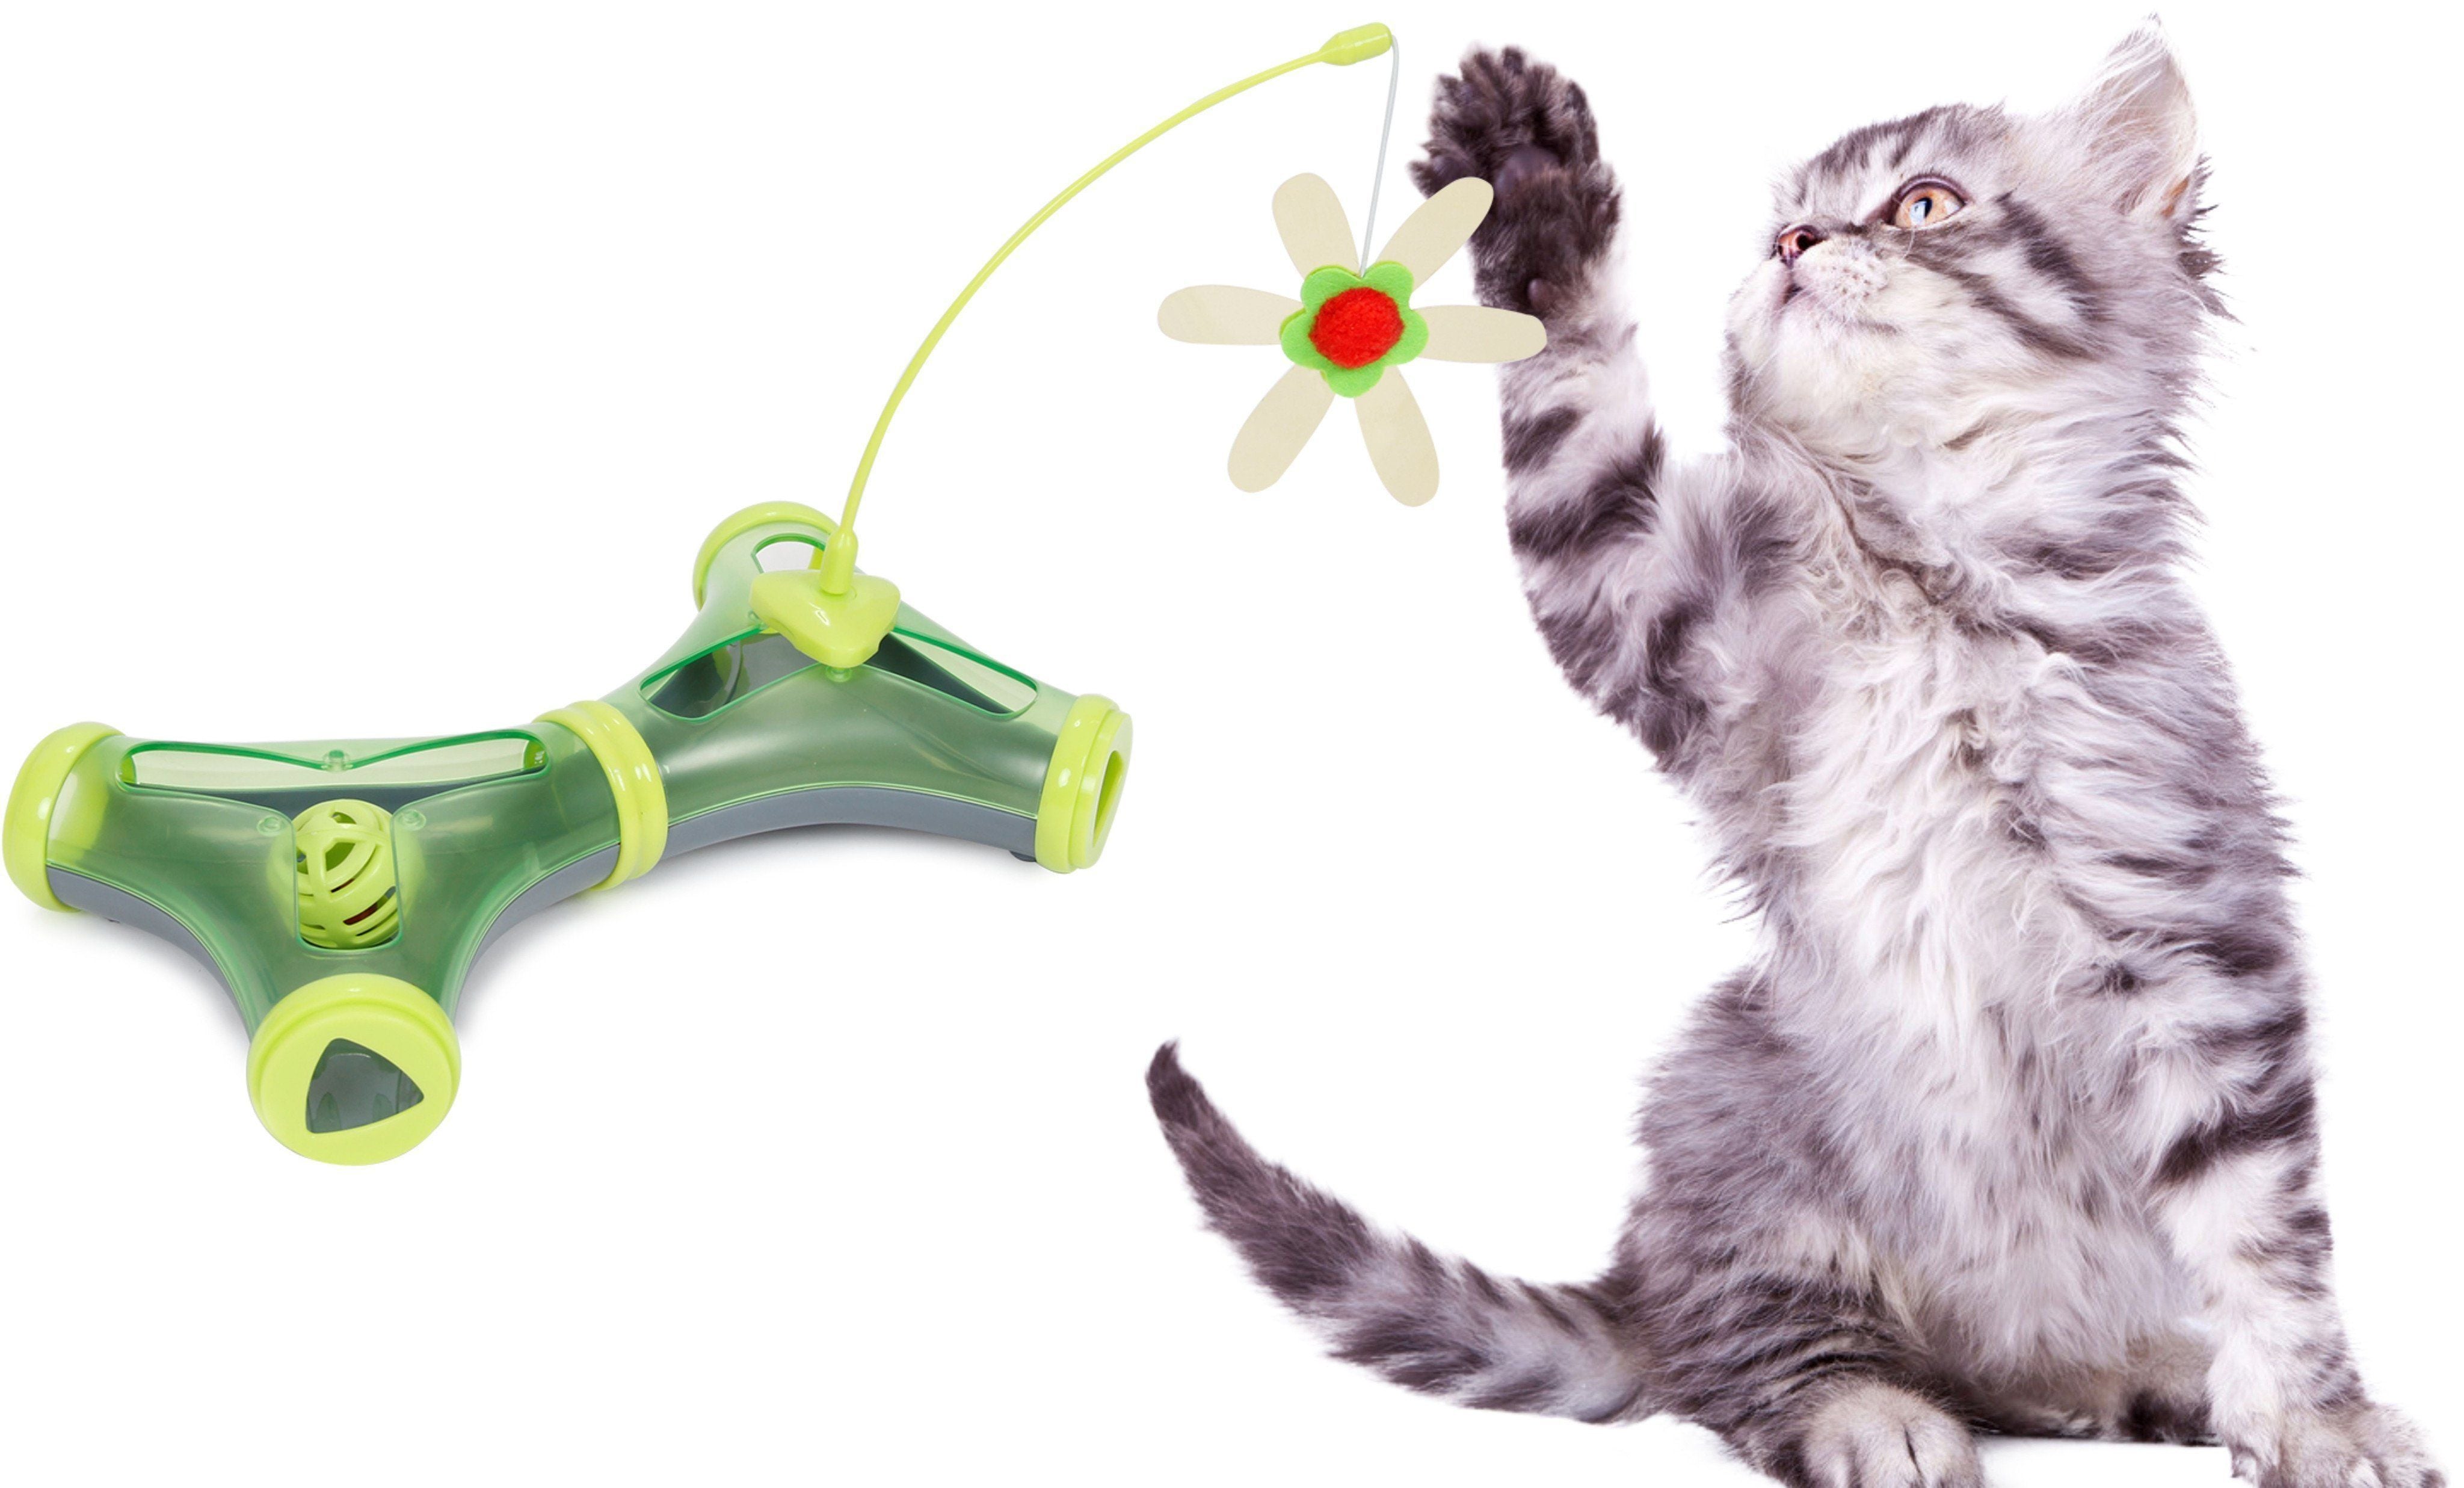 Pet Life ® 'Kitty-Tease' Interactive Teaser Kitty Cat Puzzle Toy Green 